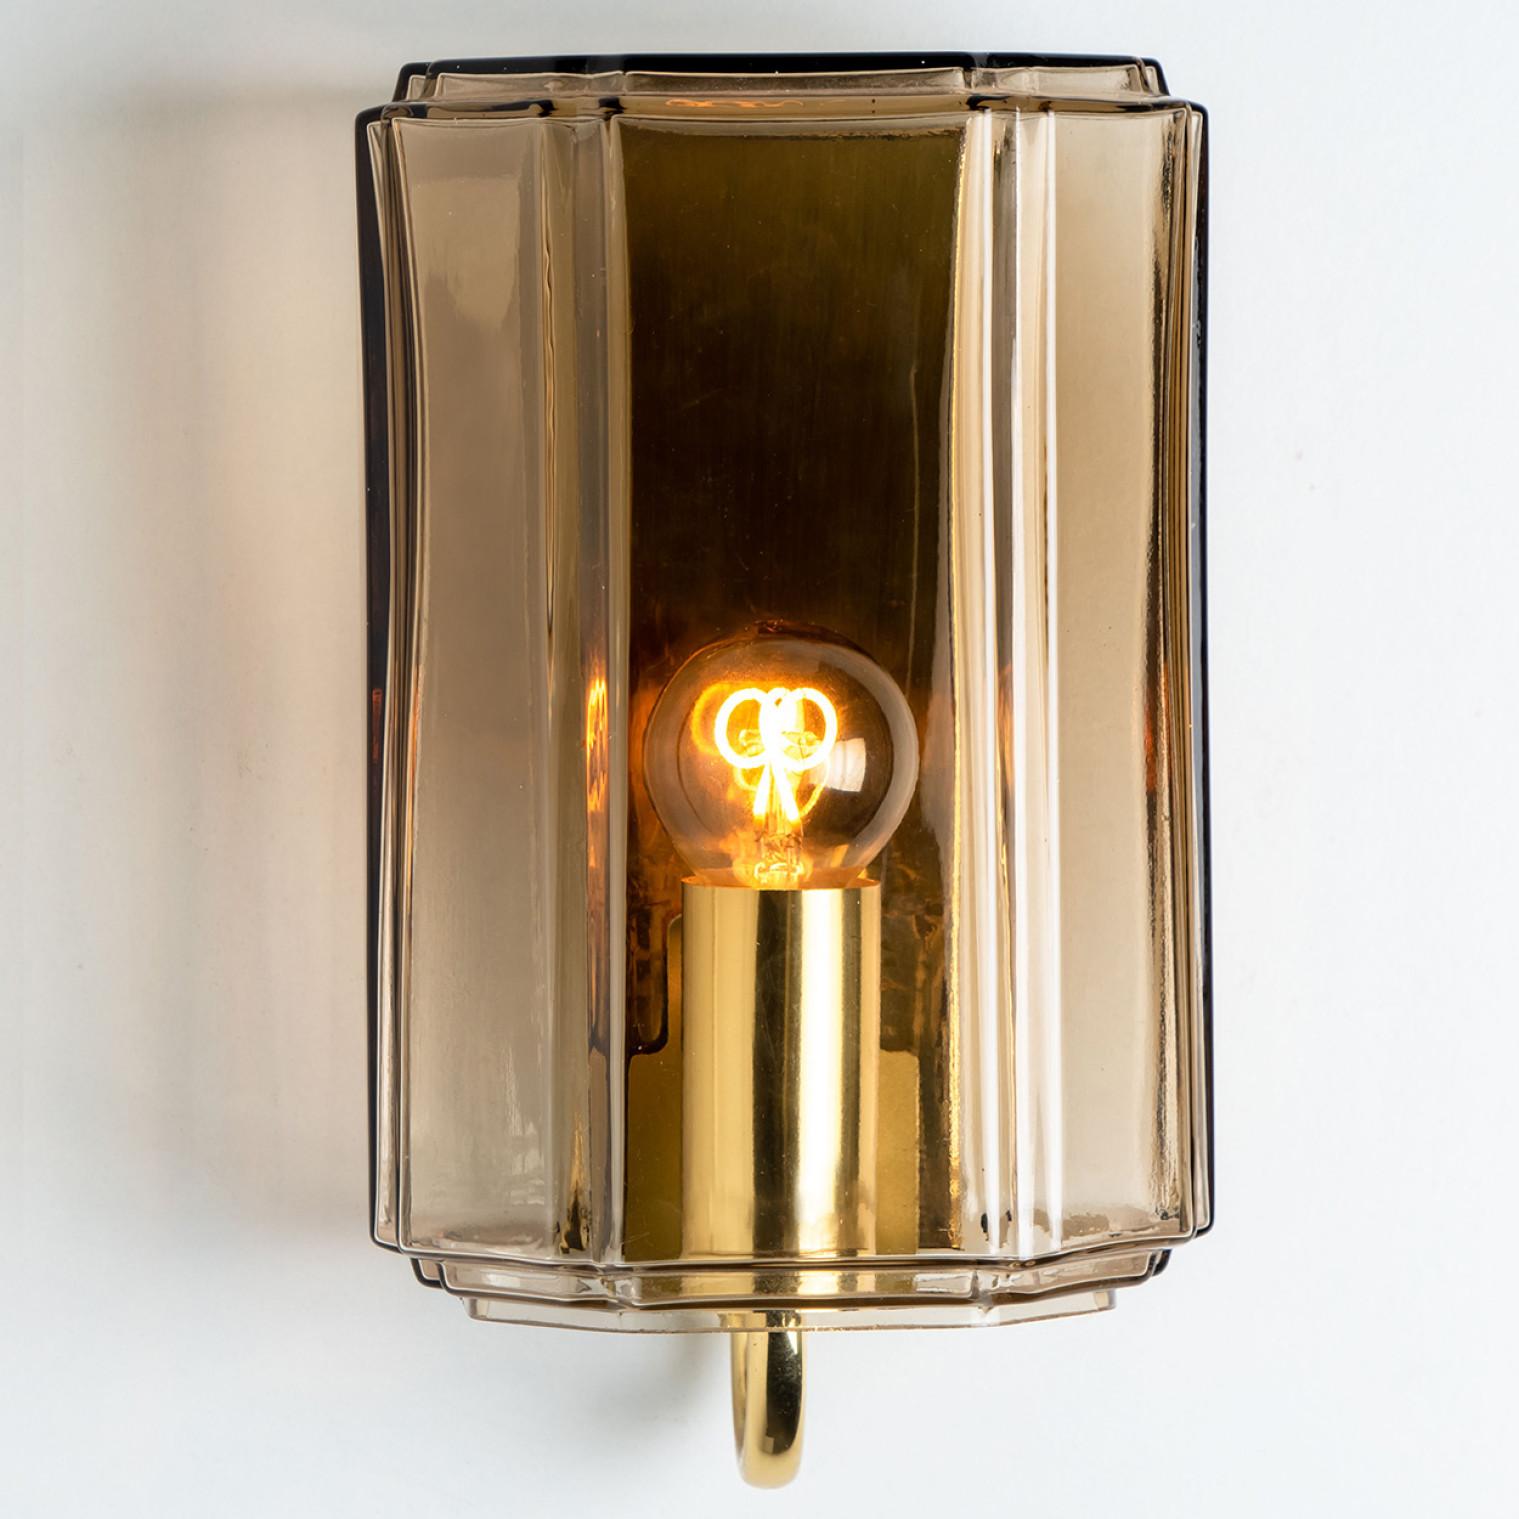 Several Smoked Glass Wall Lights Sconces by Glashütte Limburg, Germany, 1960 For Sale 8